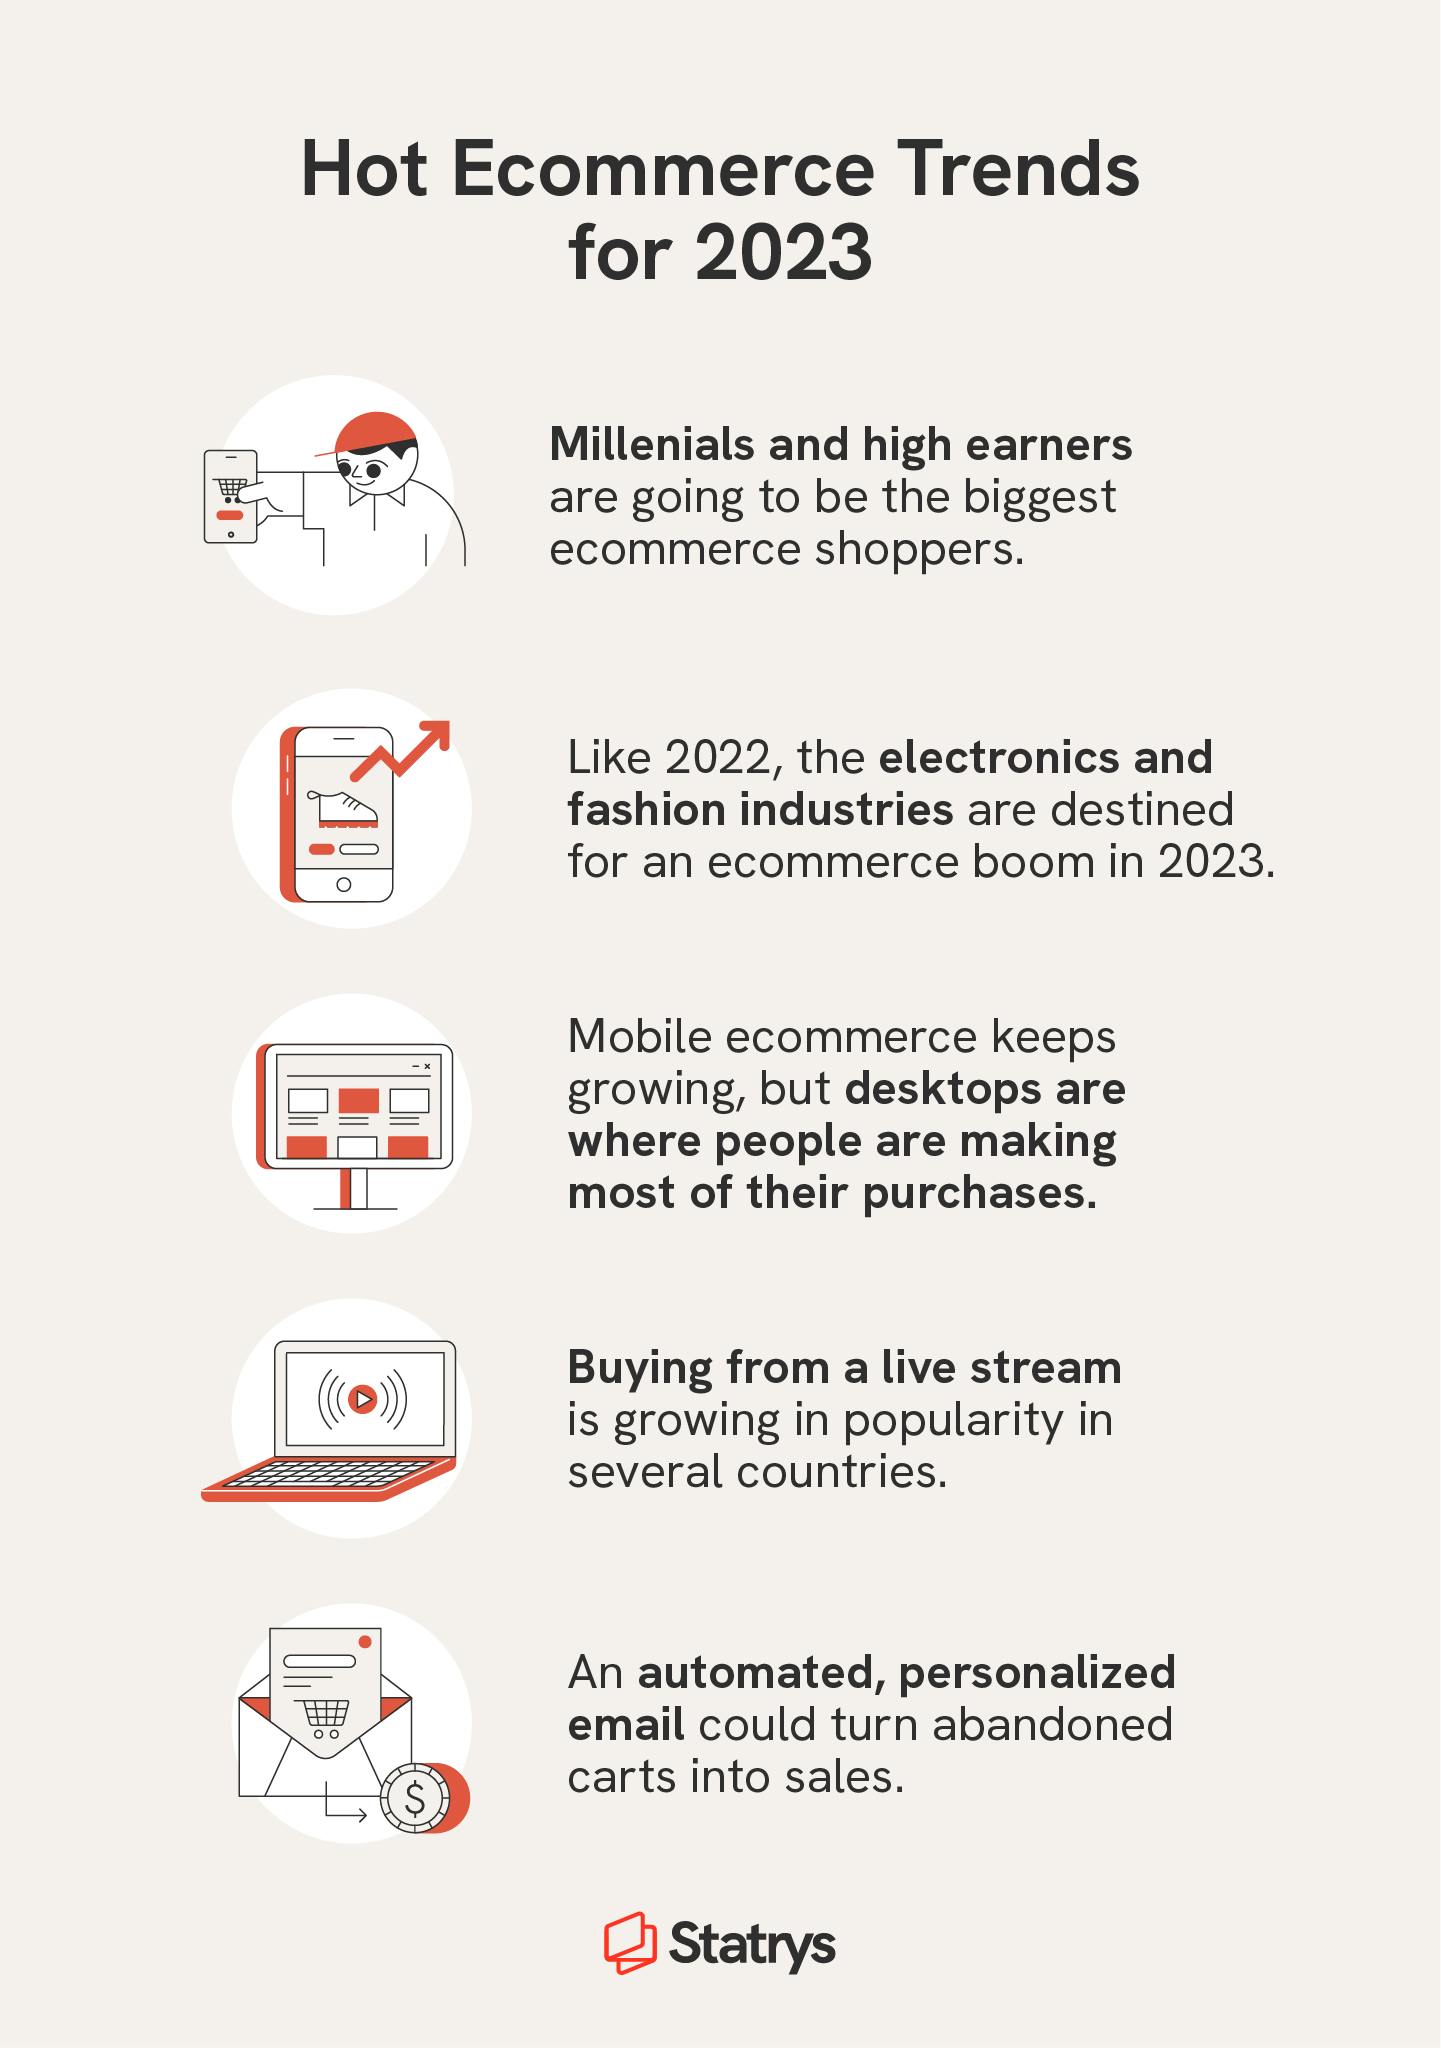 Five icons represent hot ecommerce trends to know in 2023, including that Millenials are top shoppers, electronics and fashion industries are booming online, and buying from a livestream is becoming more popular.